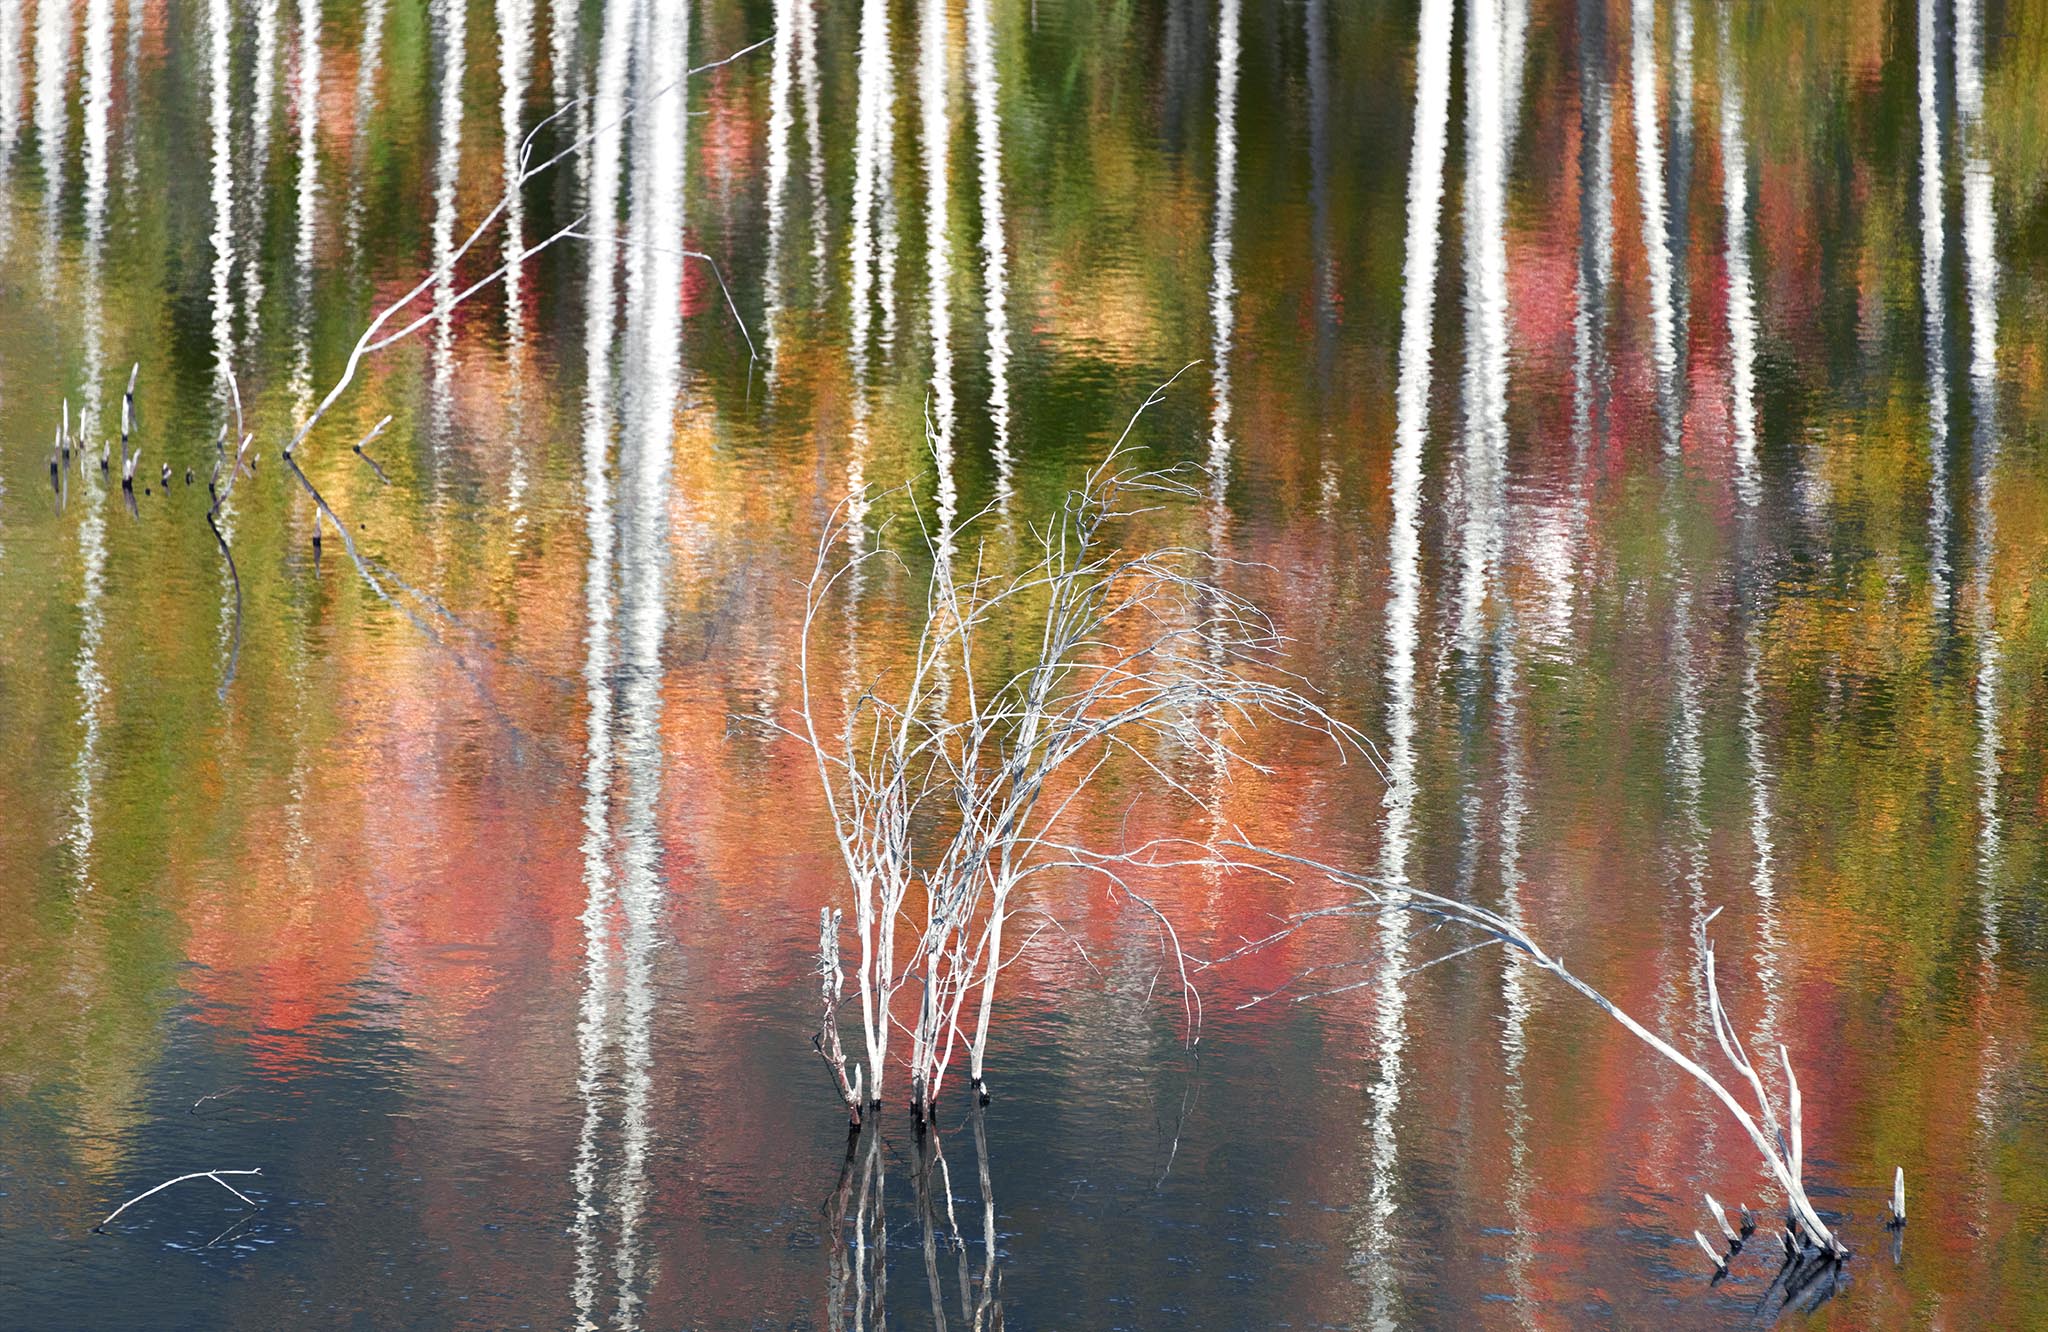 White Aspens in a reflection of colorful fall foliage.